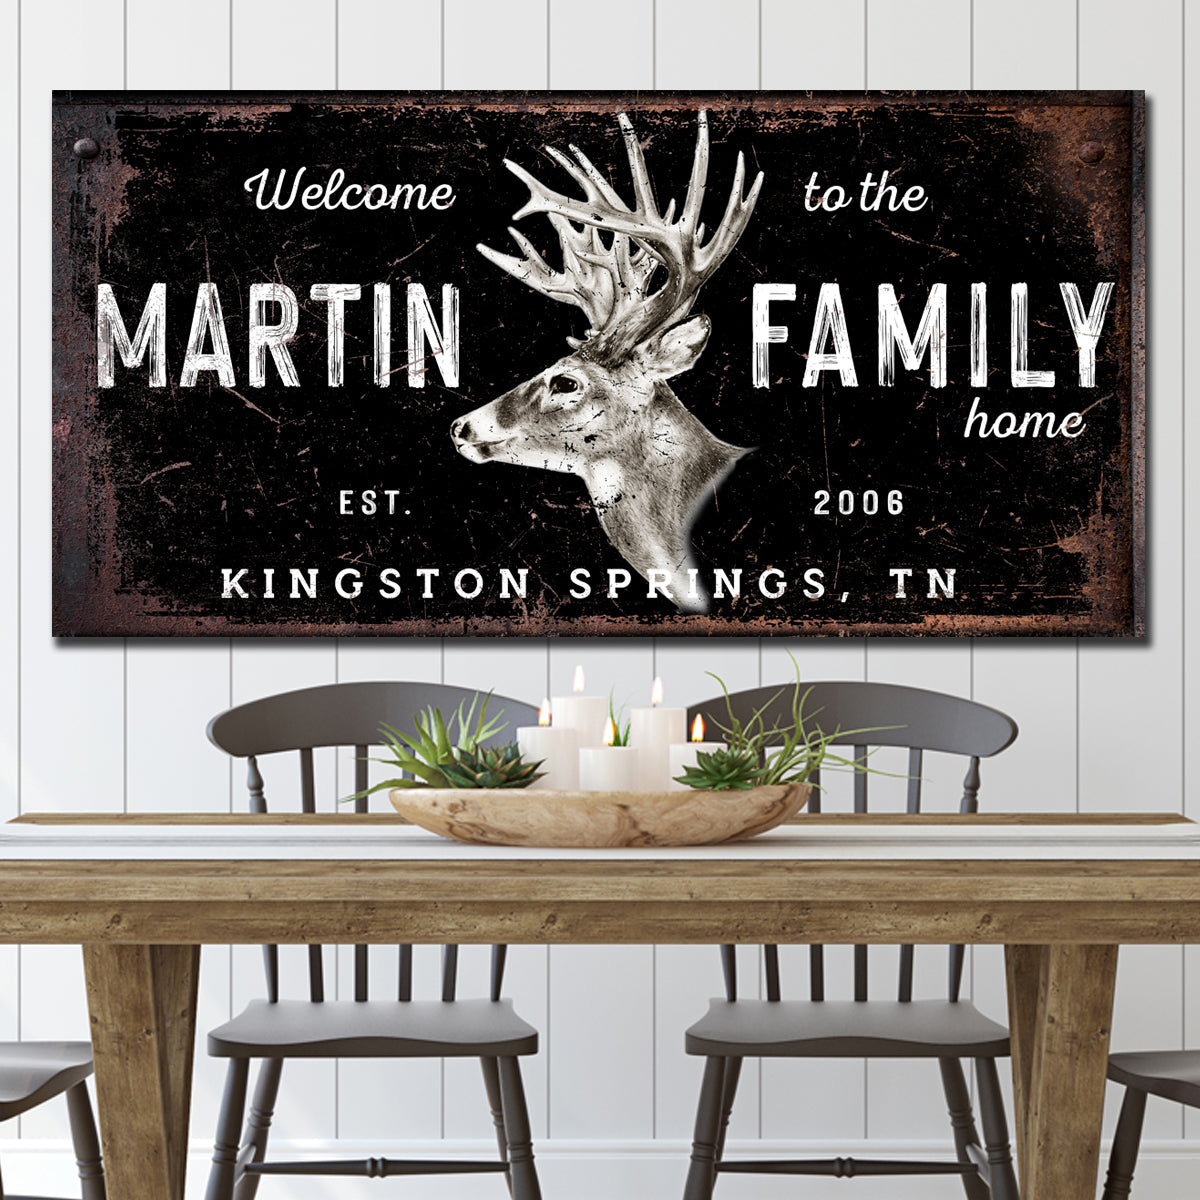 Cabin Decor personalized deer sign  with Dark Background. Welcome to the Family Home [name] Established in 2008 [Year] with City and State. Deer head metal wall art available.